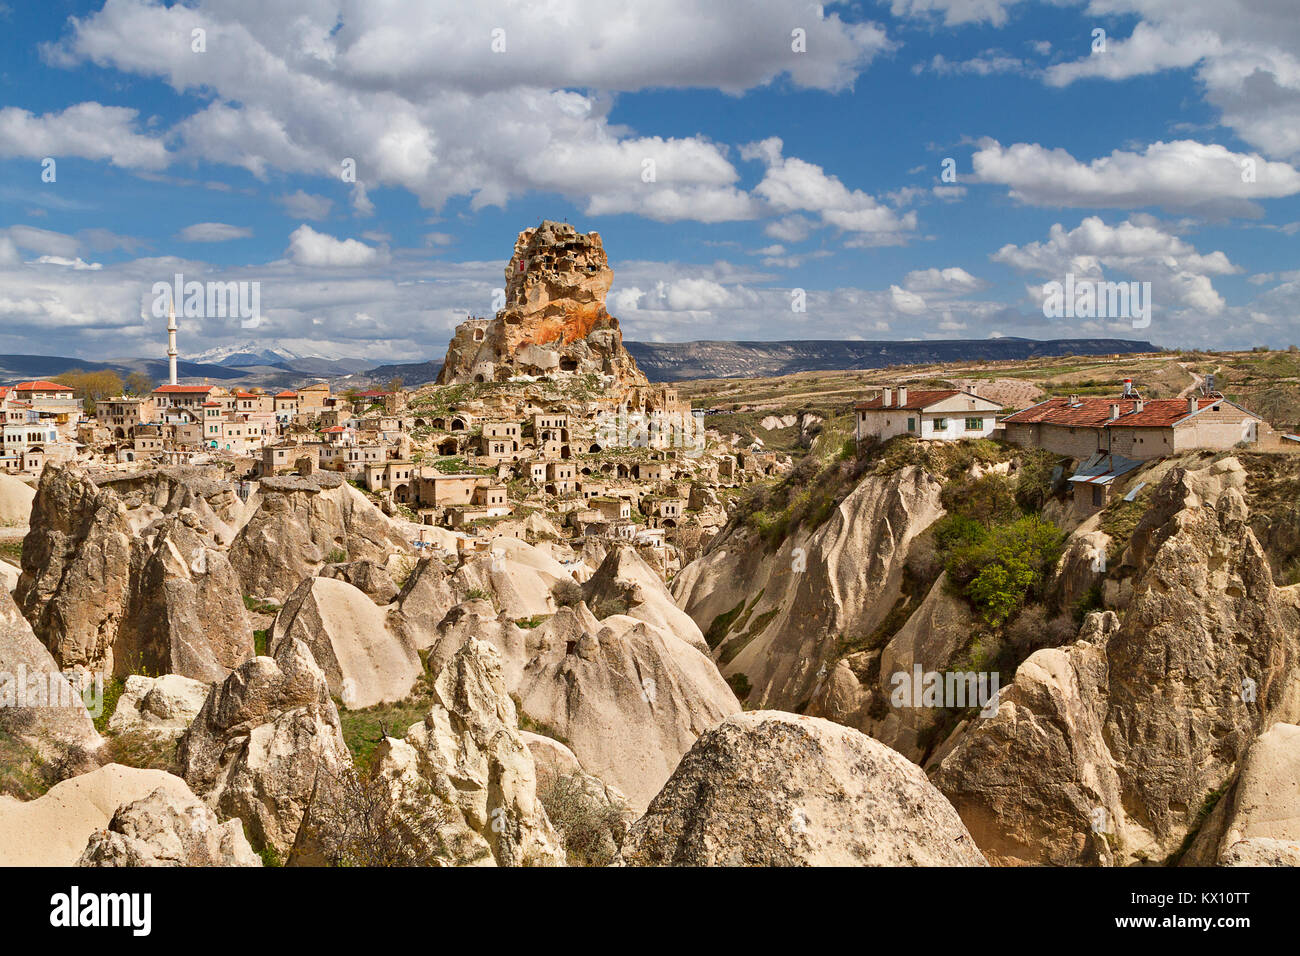 View over the town of Ortahisar and cave dwellings with the Mount Erciyes in the background, in Cappadocia, Turkey. Stock Photo